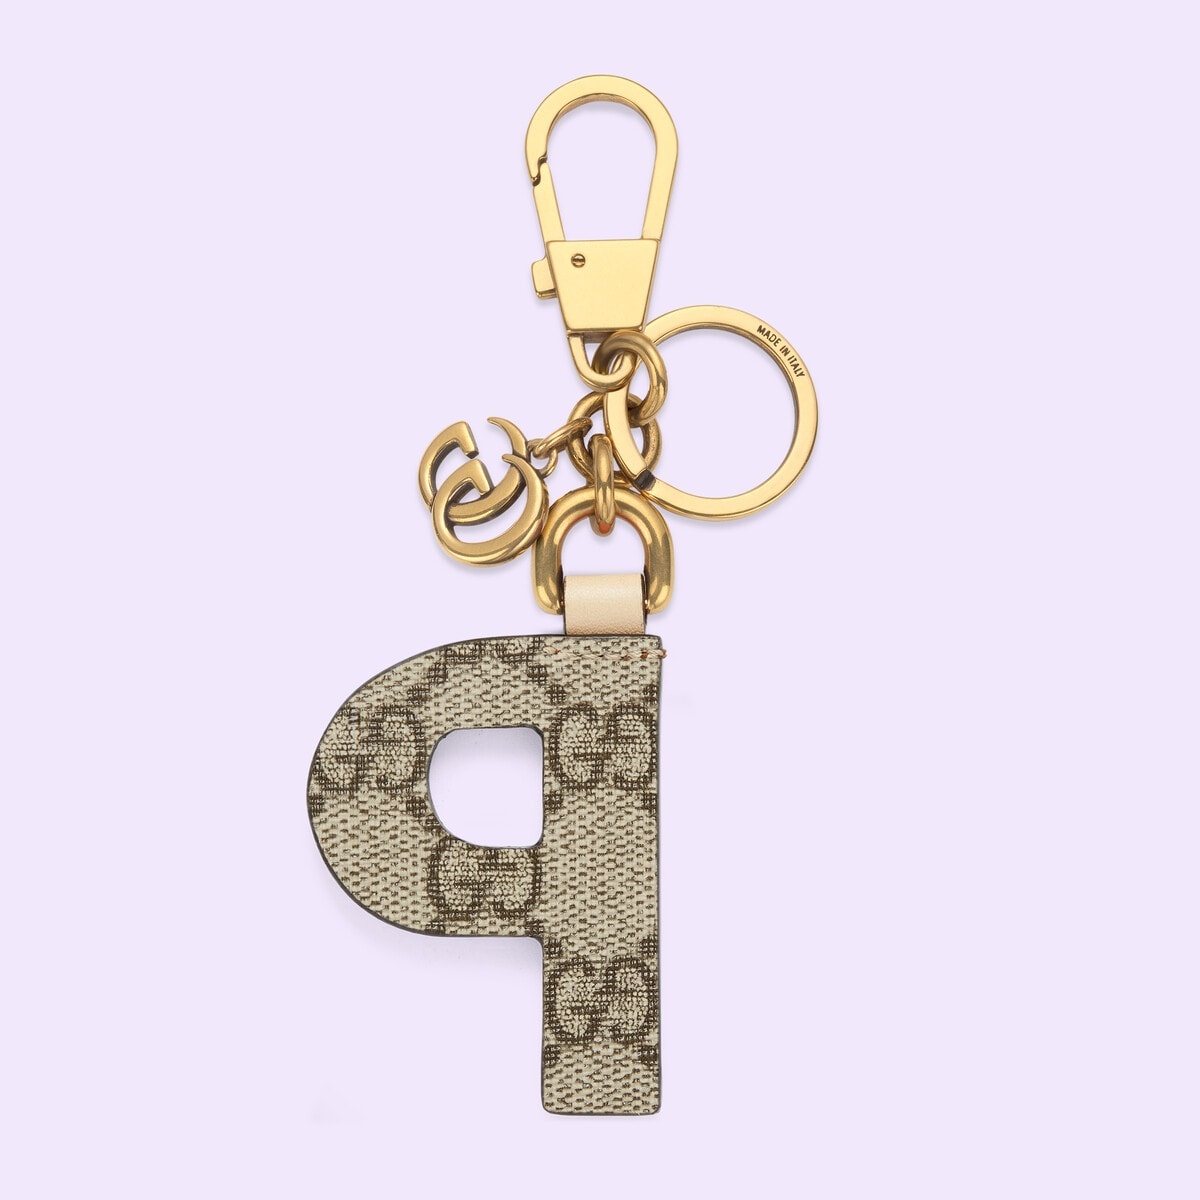 Letter P keychain - 2